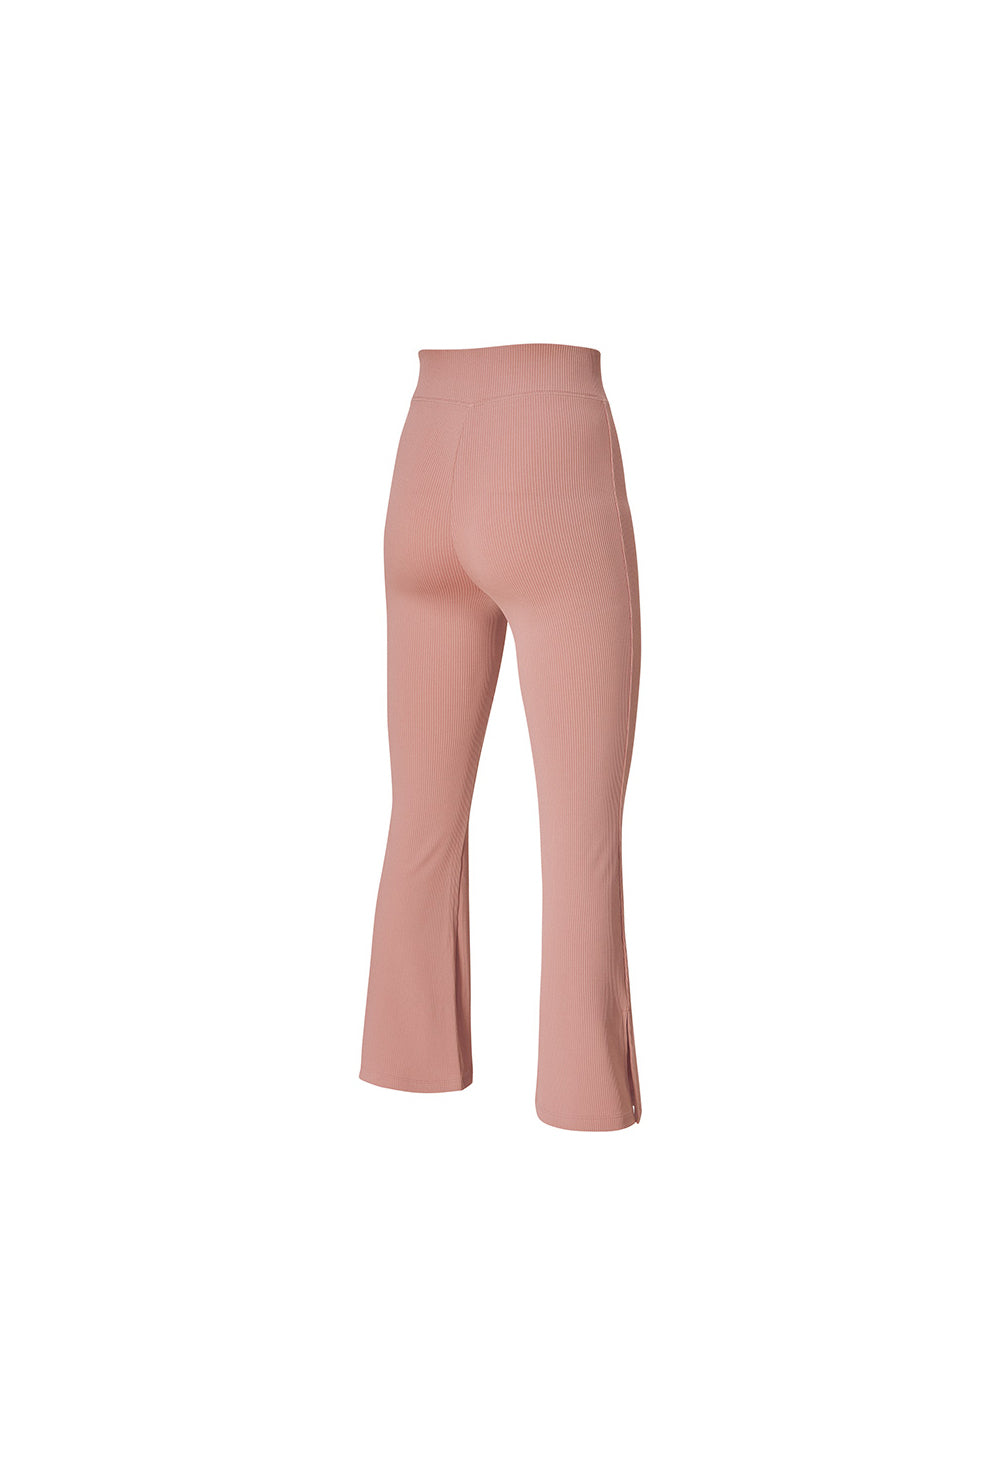 Ribbed Tension Boots Cut Slit Pants - Baroque Rose